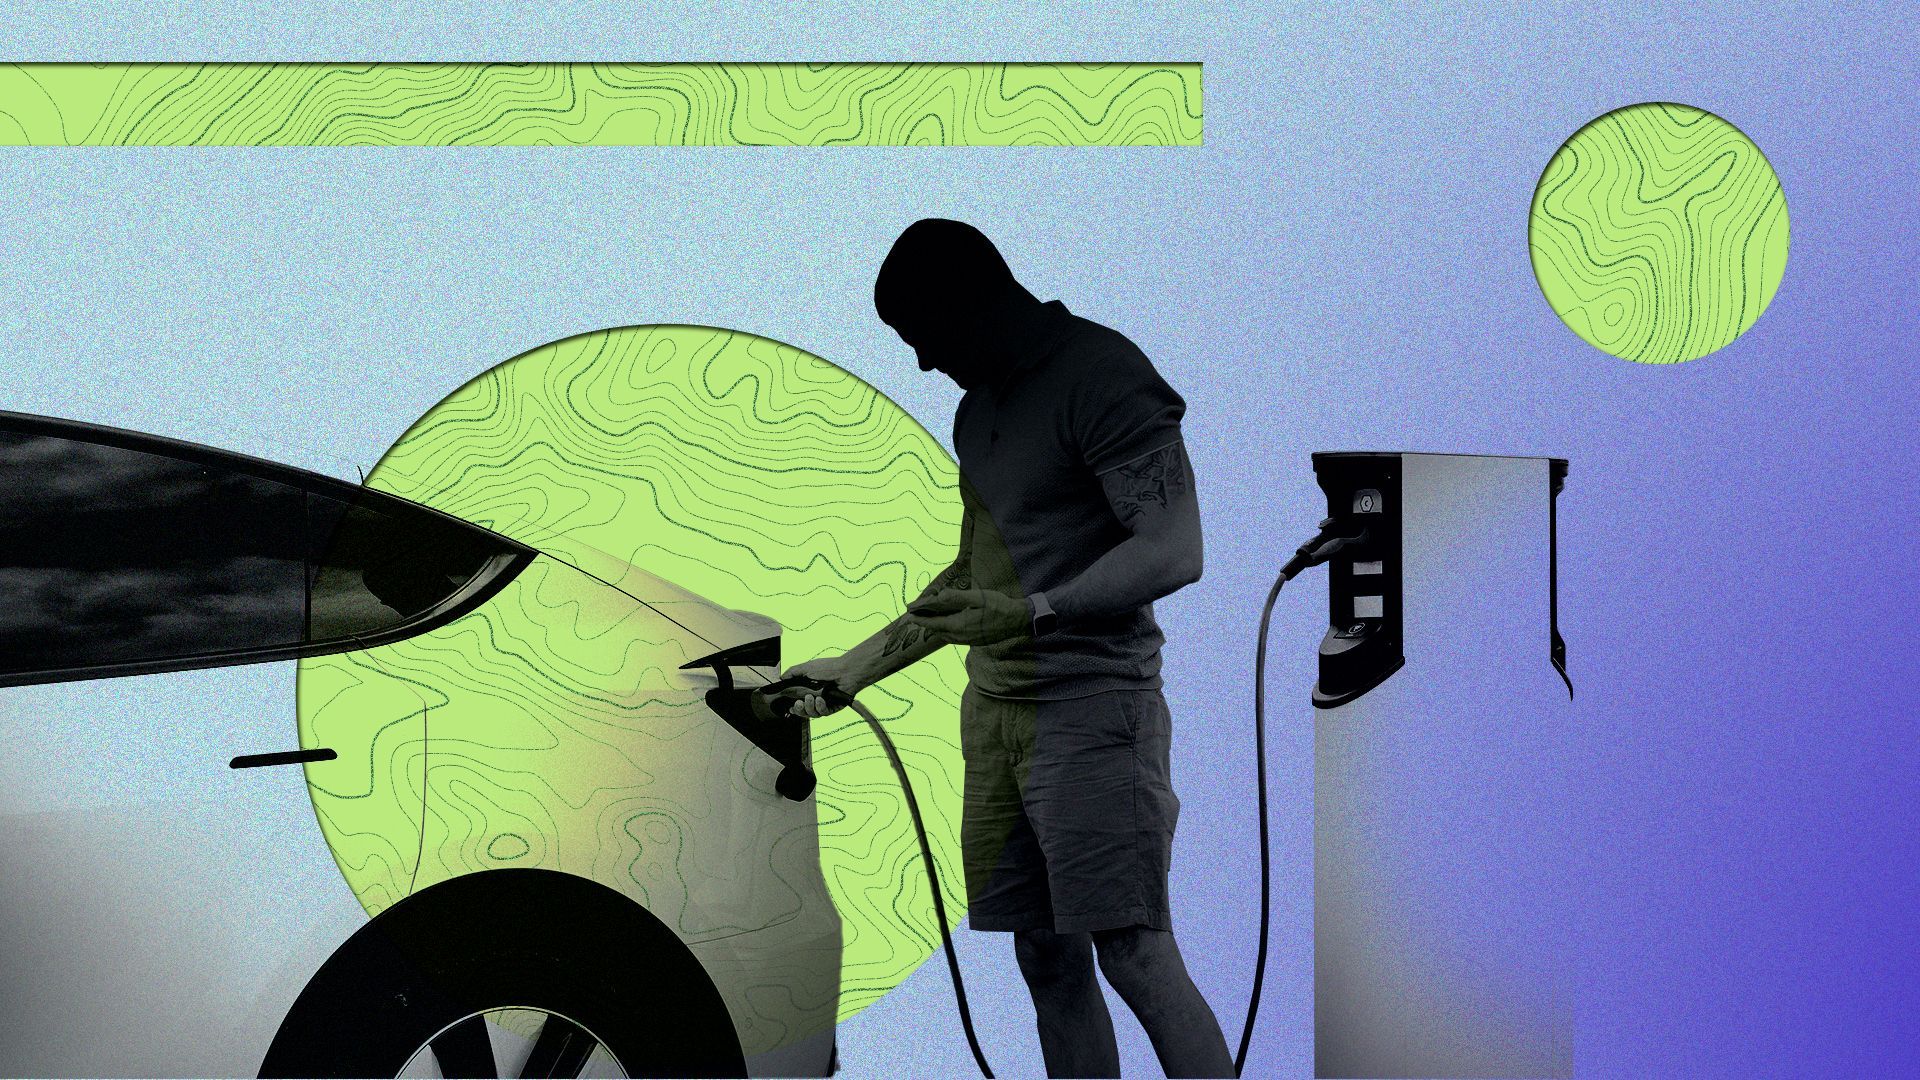 Illustration of a silhouetted person charging their electric vehicle surrounded